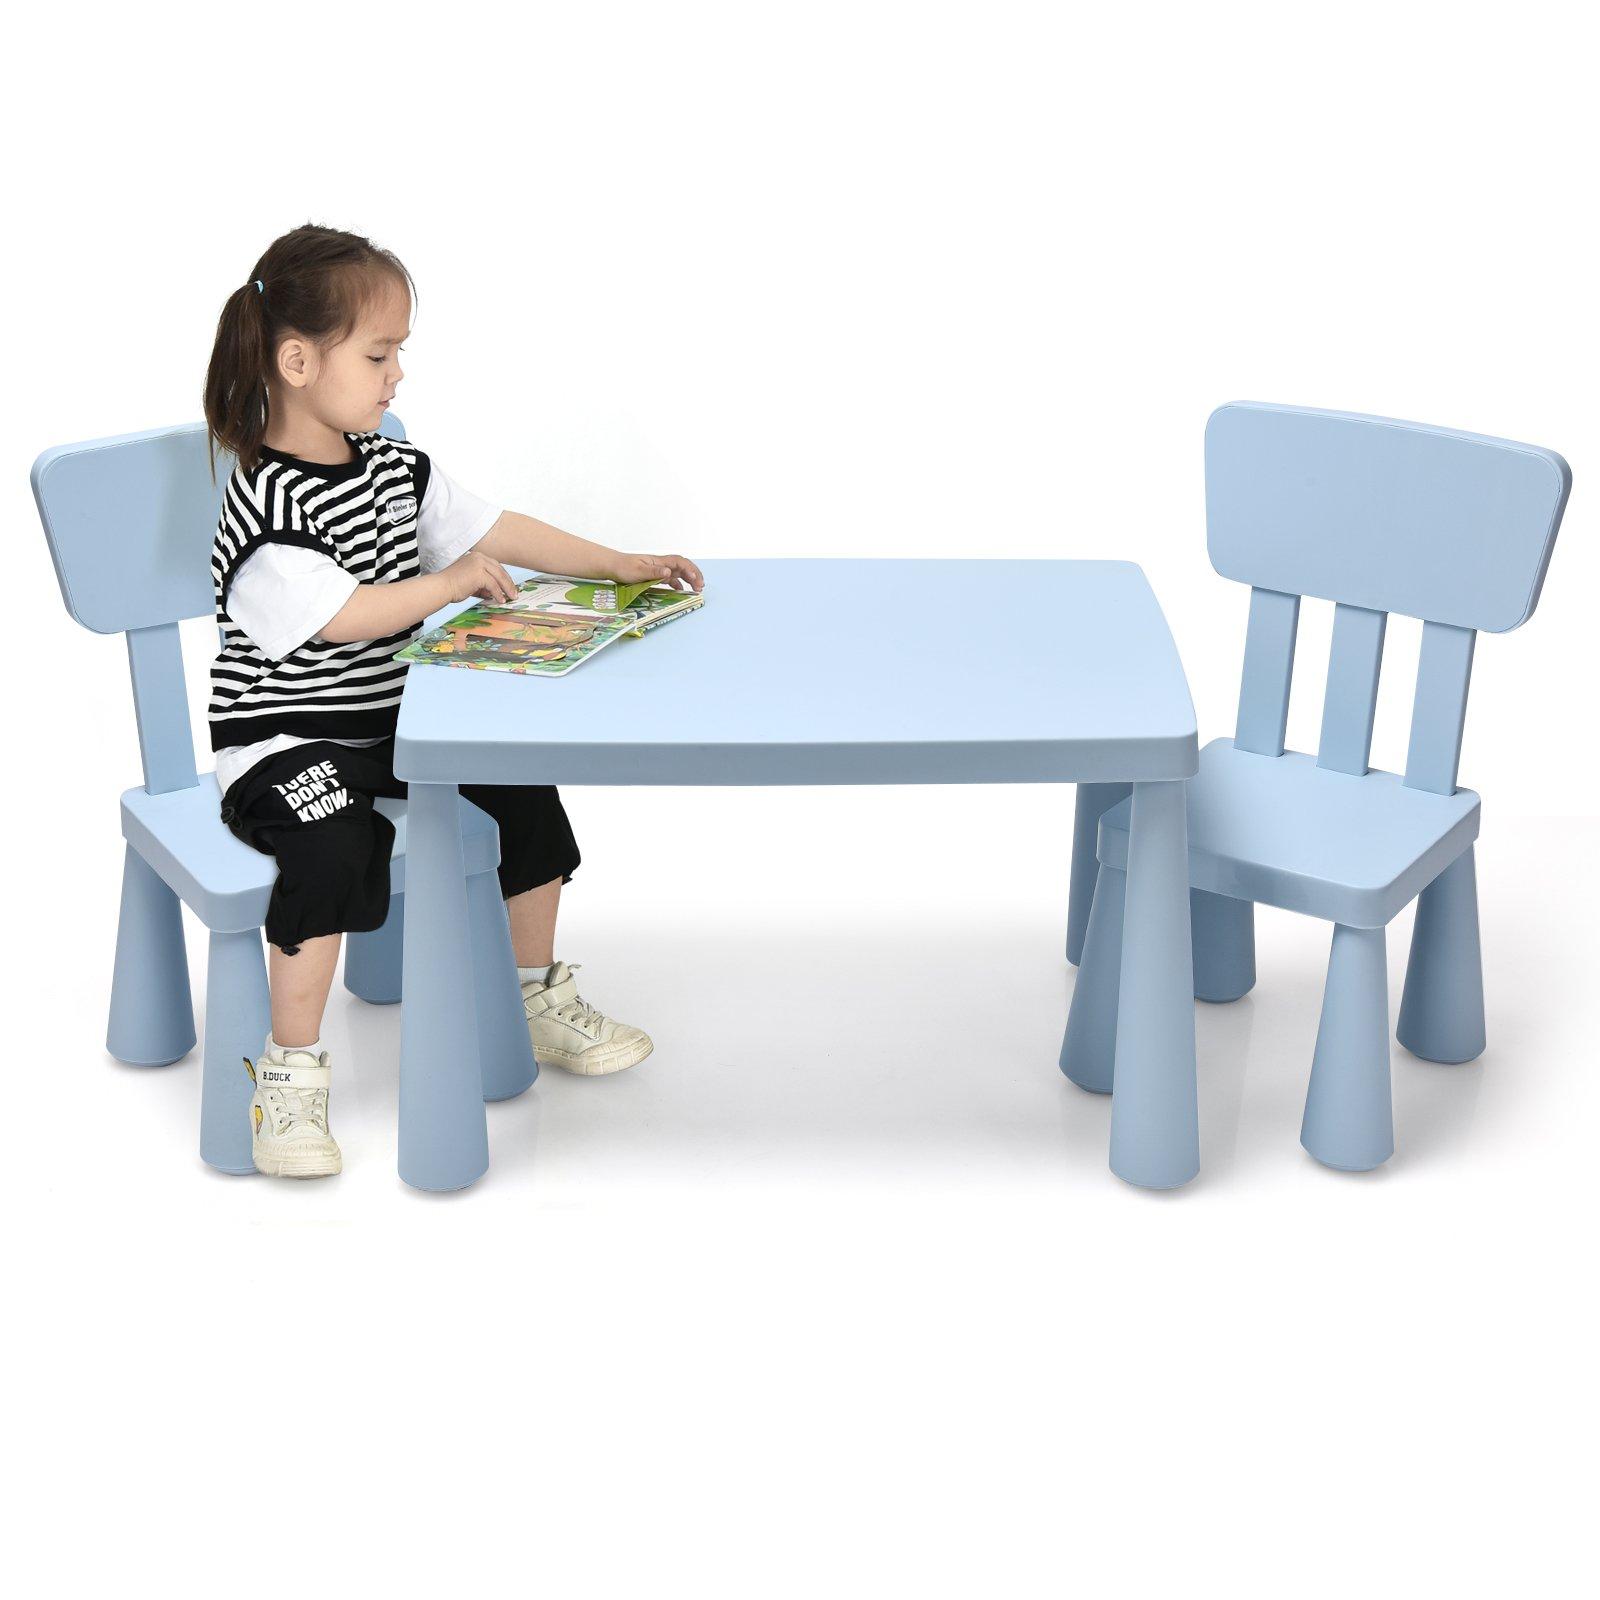 Children Play Table with 2 Chairs Set for Eating Drawing Writing